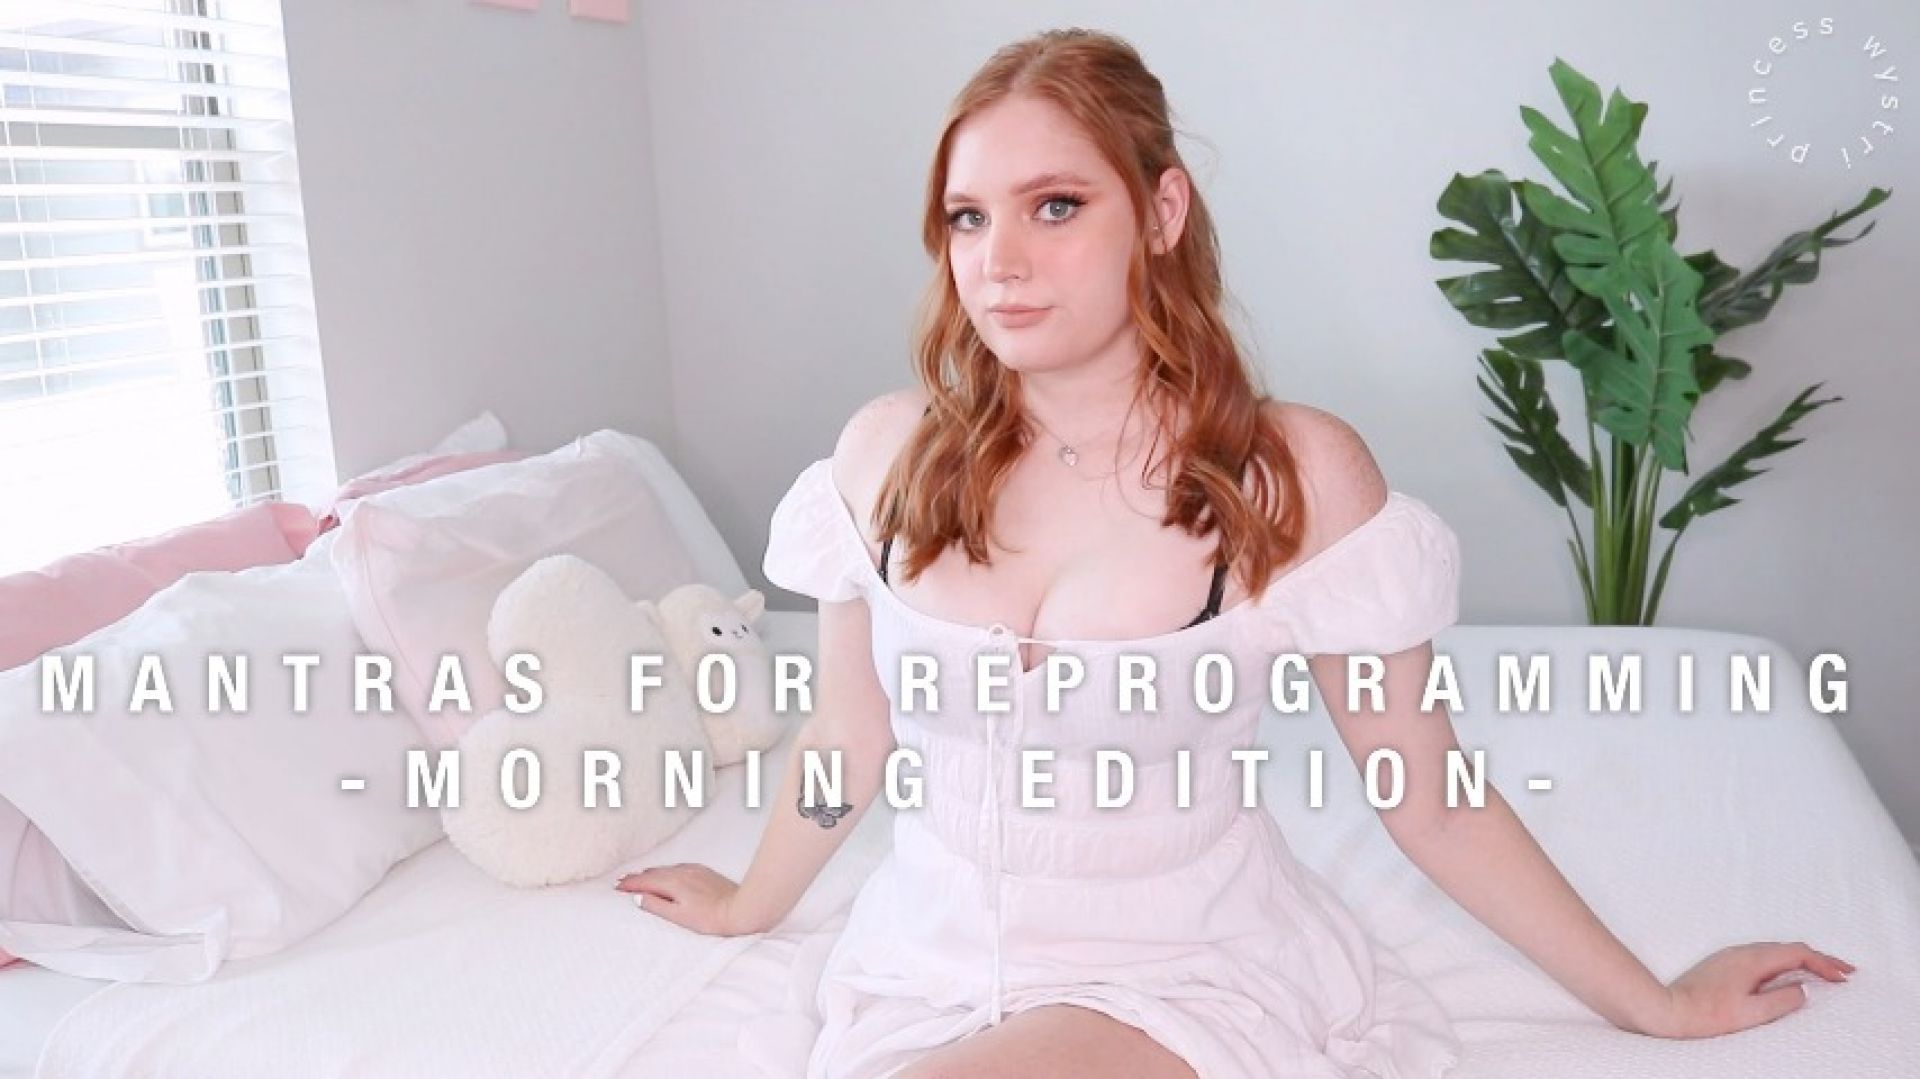 leaked Mantras For Reprogramming Morning Edition thumbnail